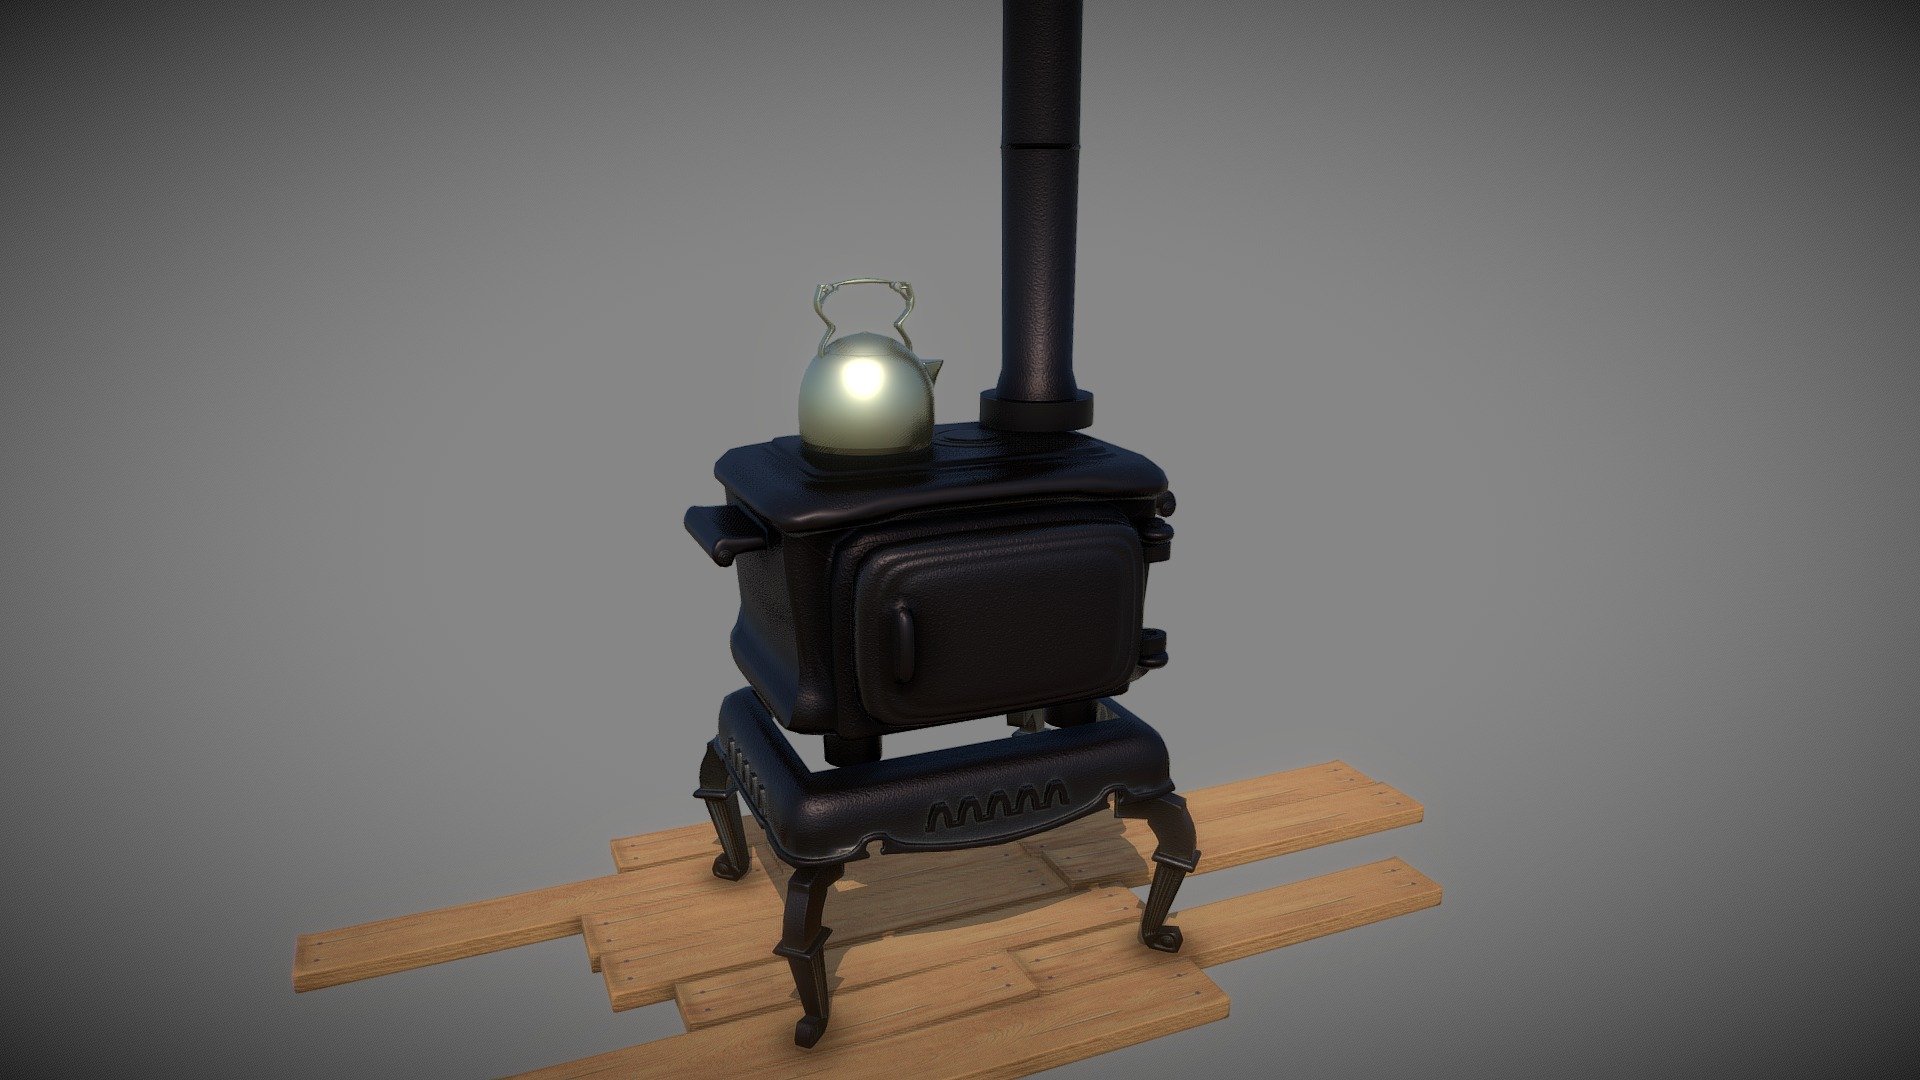 Custom Designed Furniture Prop.

Fictional antique stove oven prop I modeled from scratch with design influenced by existing victorian anitques and furnitures. I try to make the shapes unique as possible to avoid being disrespectful to any antique family crest and symbols.
The textured dirt, grime and weathering are hand placed.

&#42;For my recent professional work though we used Substance Painter/Designer for quick and precise procedural texturing .

Feel free to message me if by chance you feel that this 3d asset that I have created coincidentally looks too visually similar to any existing work or product and I will gladly change/modify/ or remove it completely 3d model